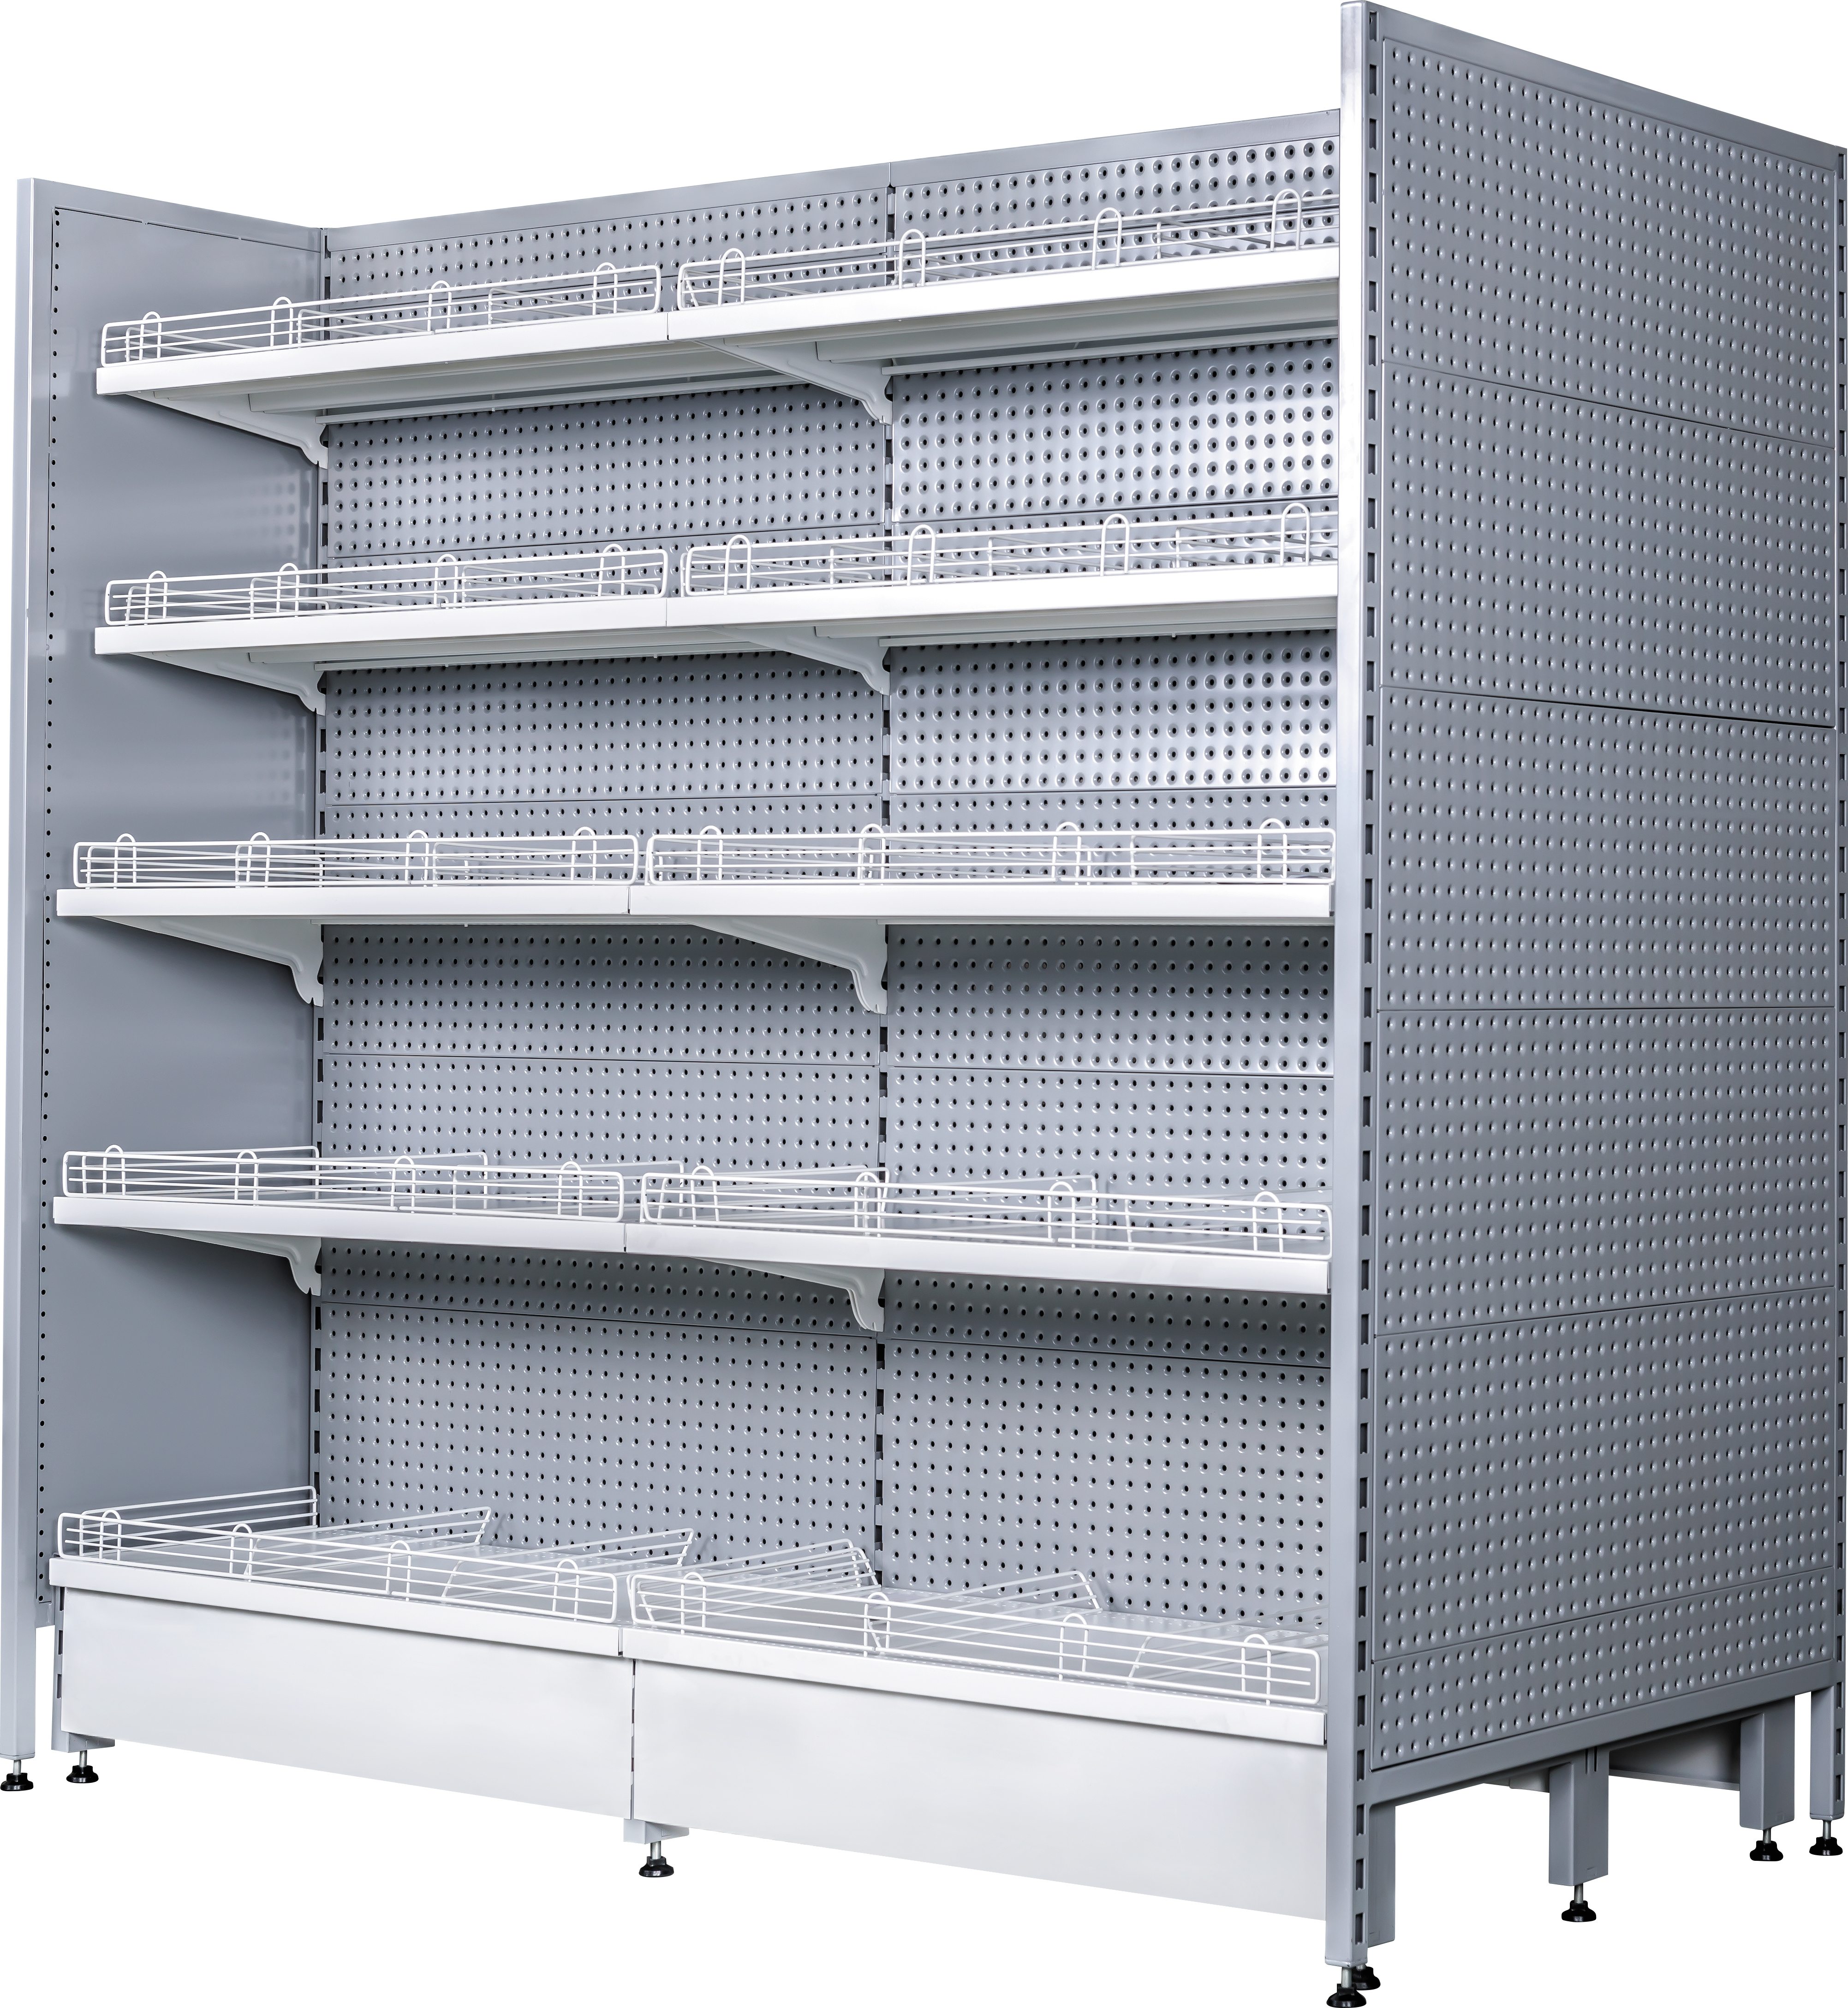 Chinese wholesale AU50 shop shelving to Puerto Rico Manufacturer